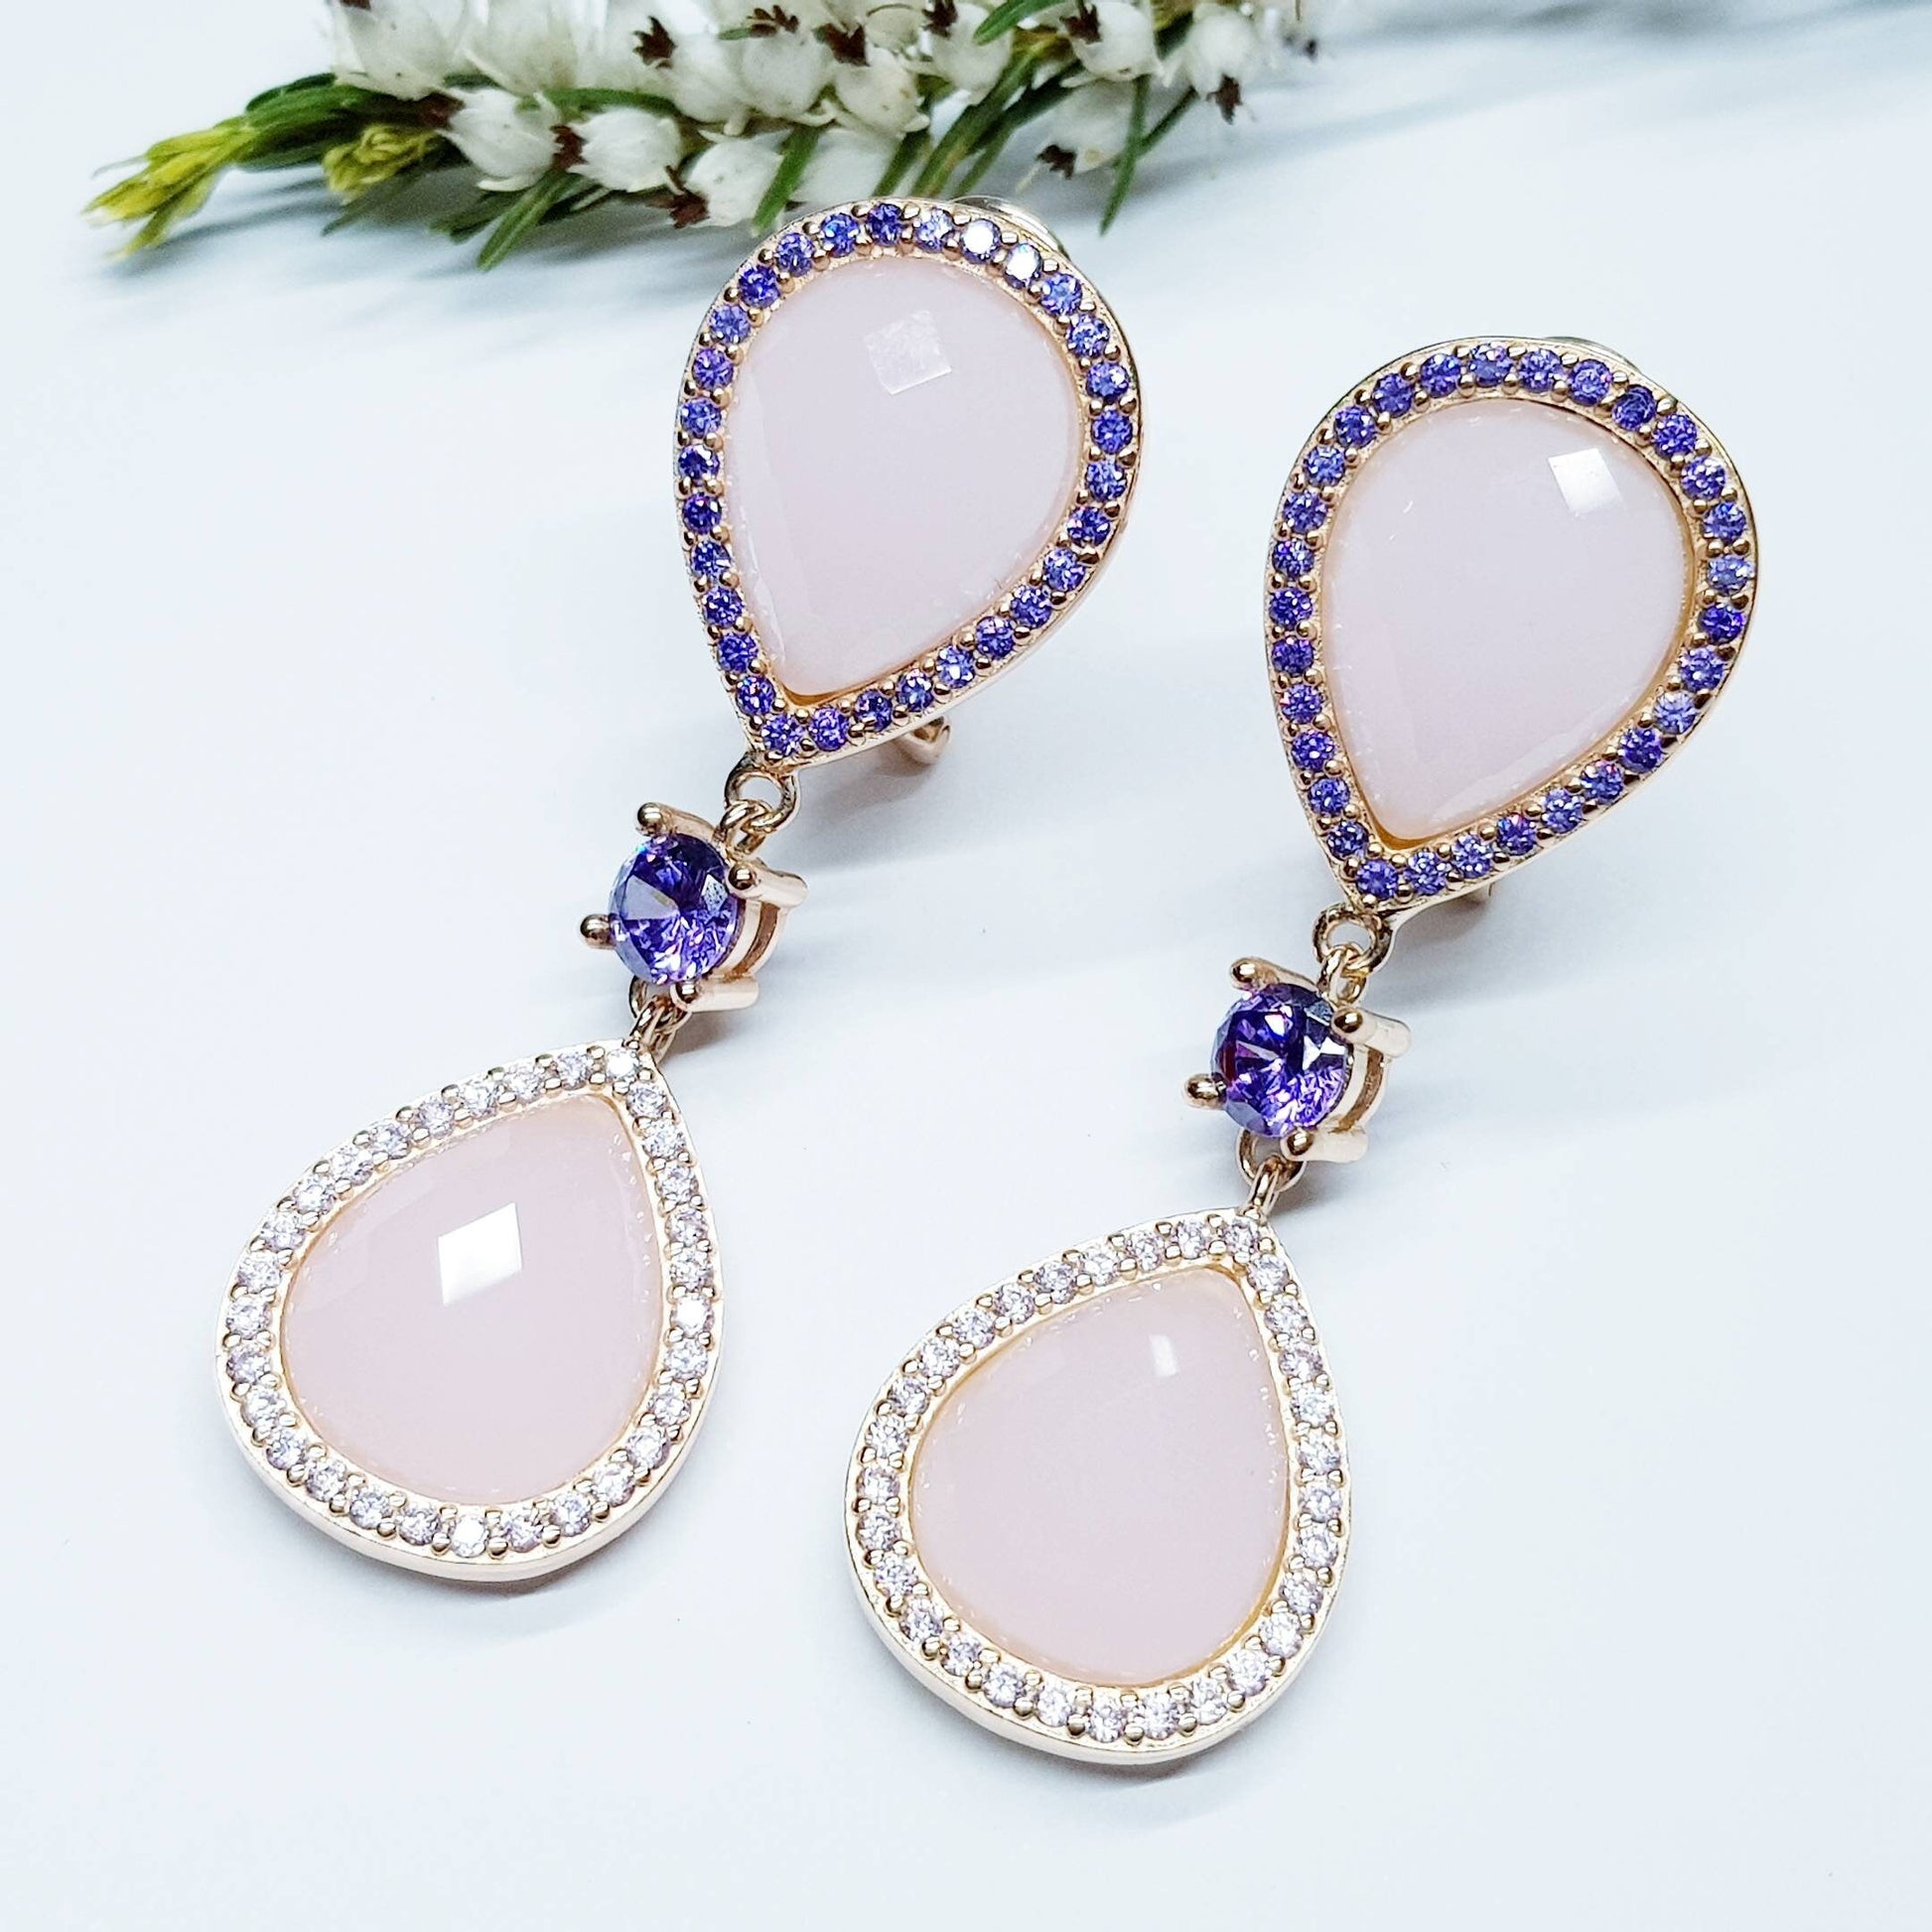 Light pink and lavender teardrop shaped earrings plated in rose gold